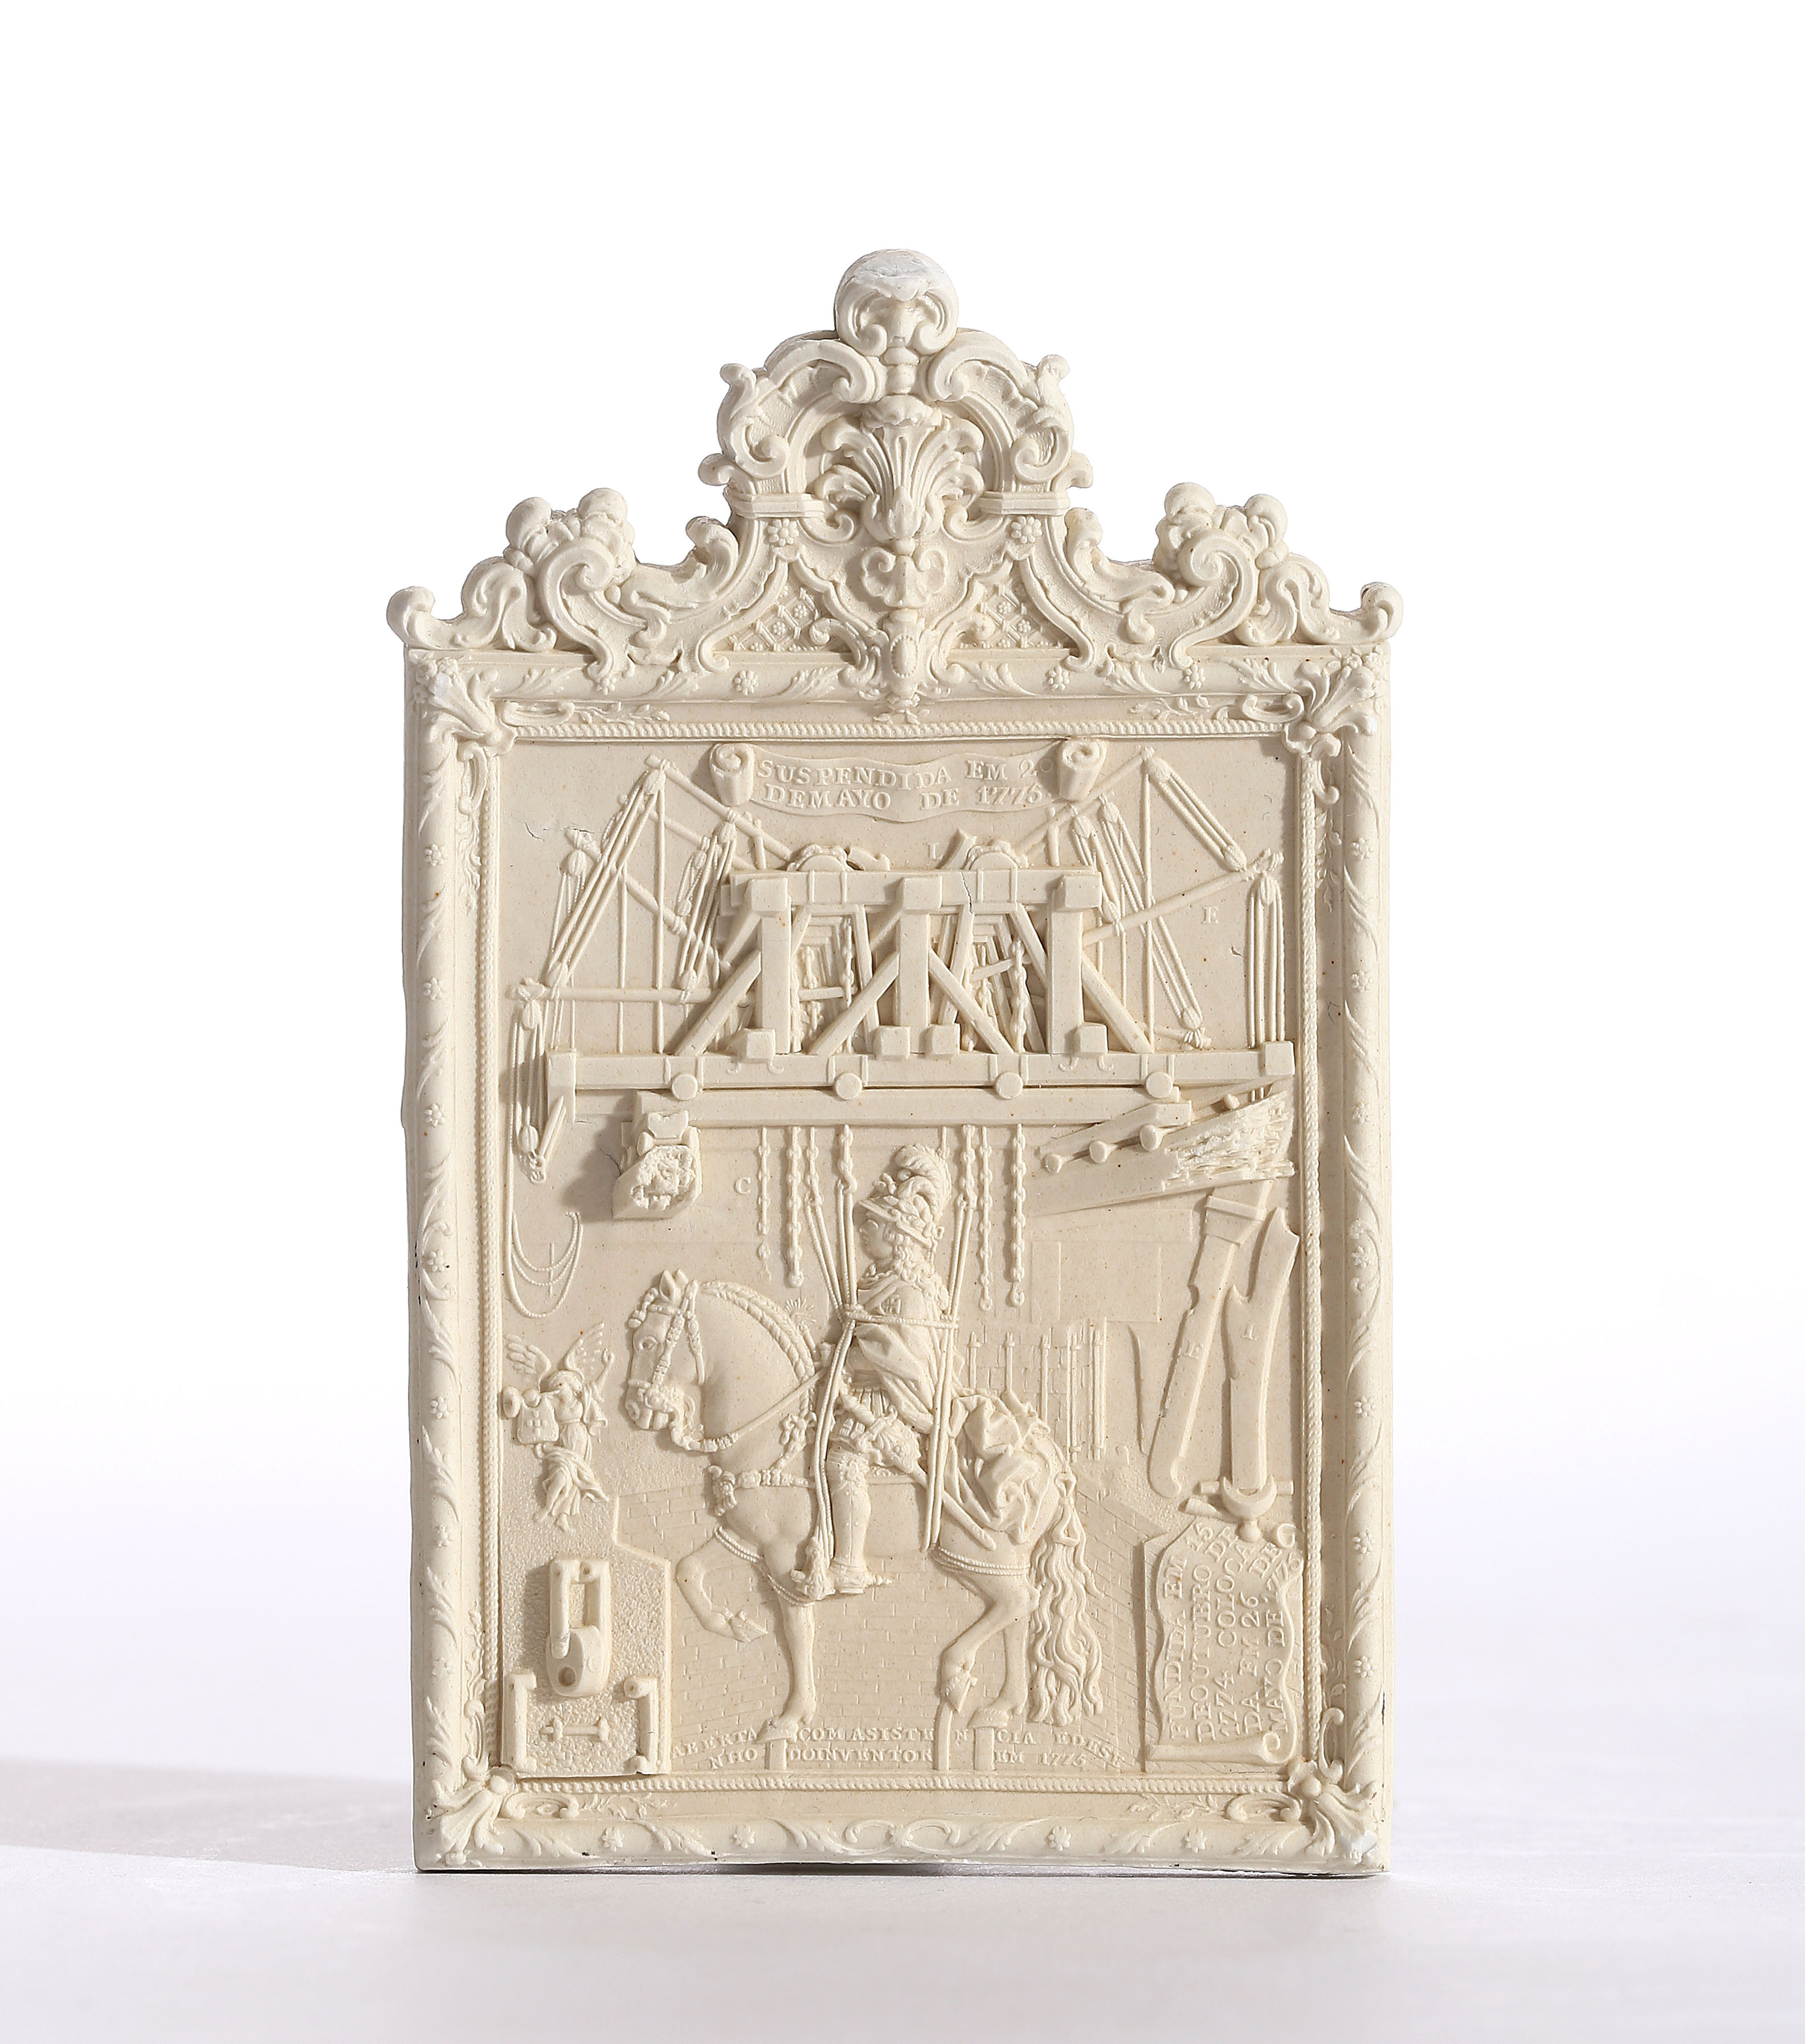 BISCUIT PORCELAIN PLAQUE COMMEMORATING THE ERECTION OF THE EQUESTRIAN STATUE OF KING JOSÉ I OF PORTUGAL